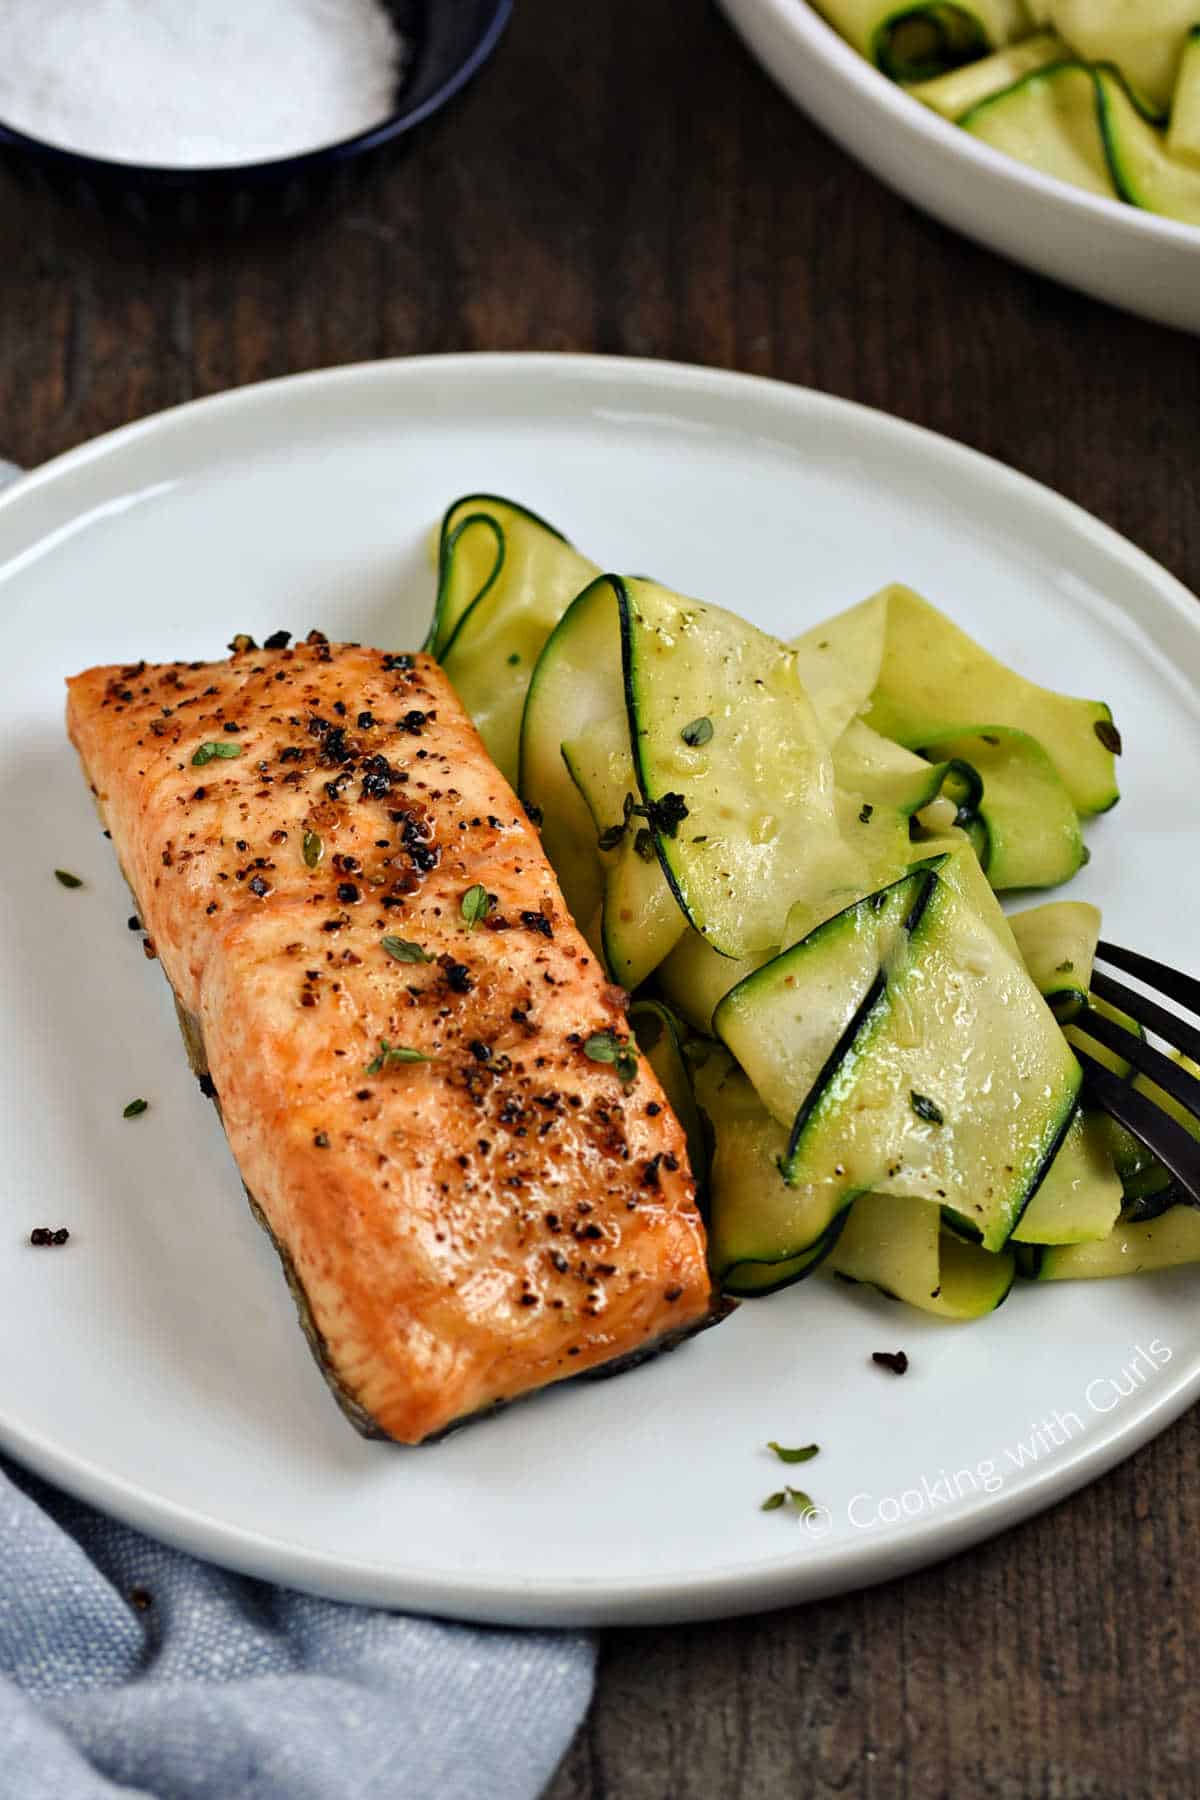 A salmon filet and sauteed zucchini ribbons on a plate.